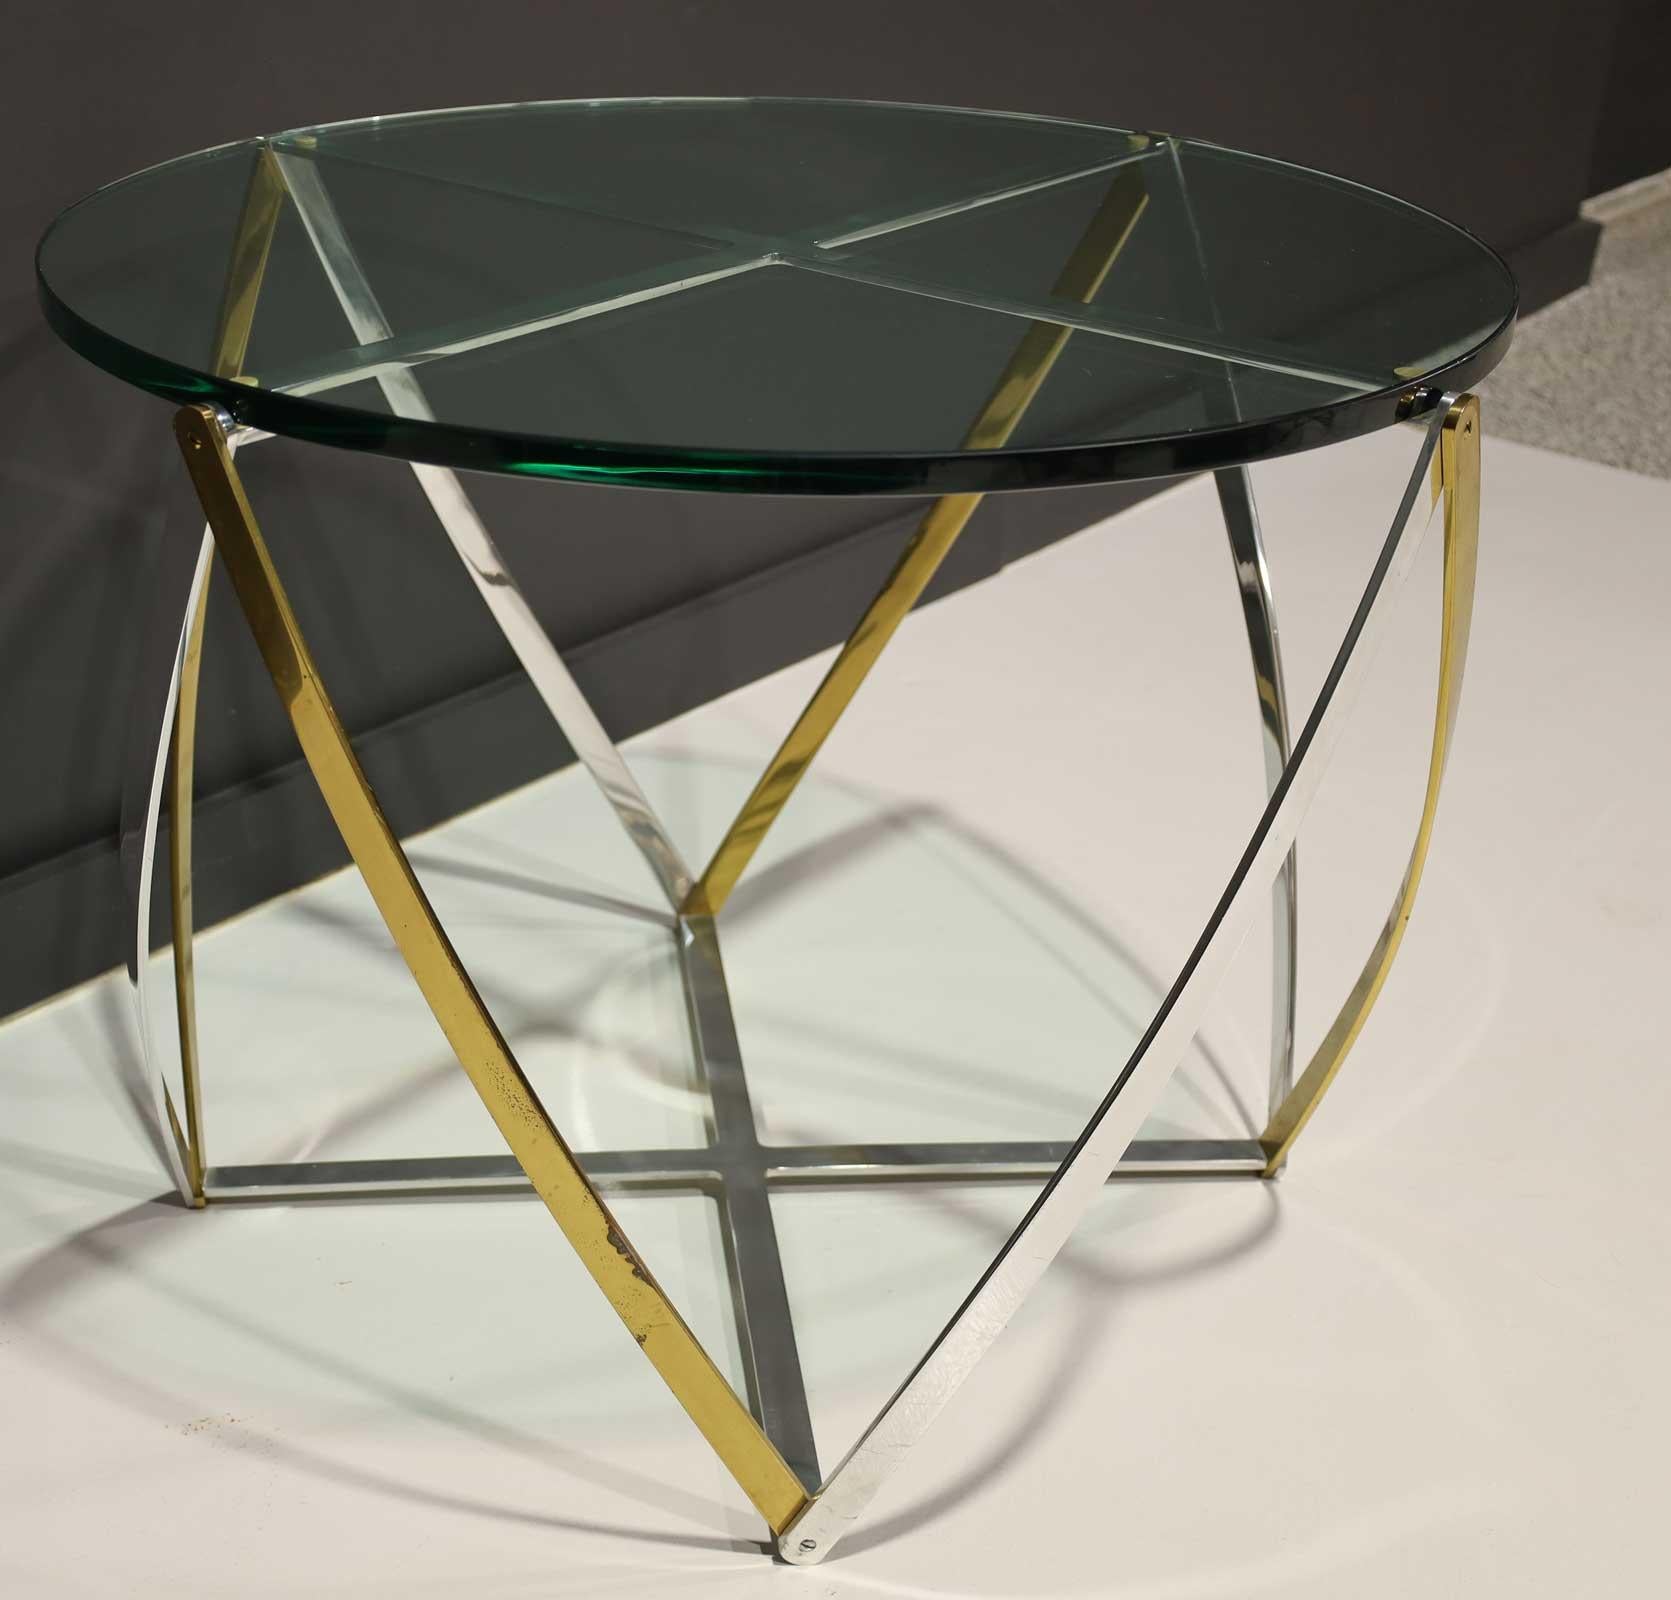 Large John Vesey Brass and Brushed Aluminum Table 1970s, Glass Top In Good Condition For Sale In Dallas, TX